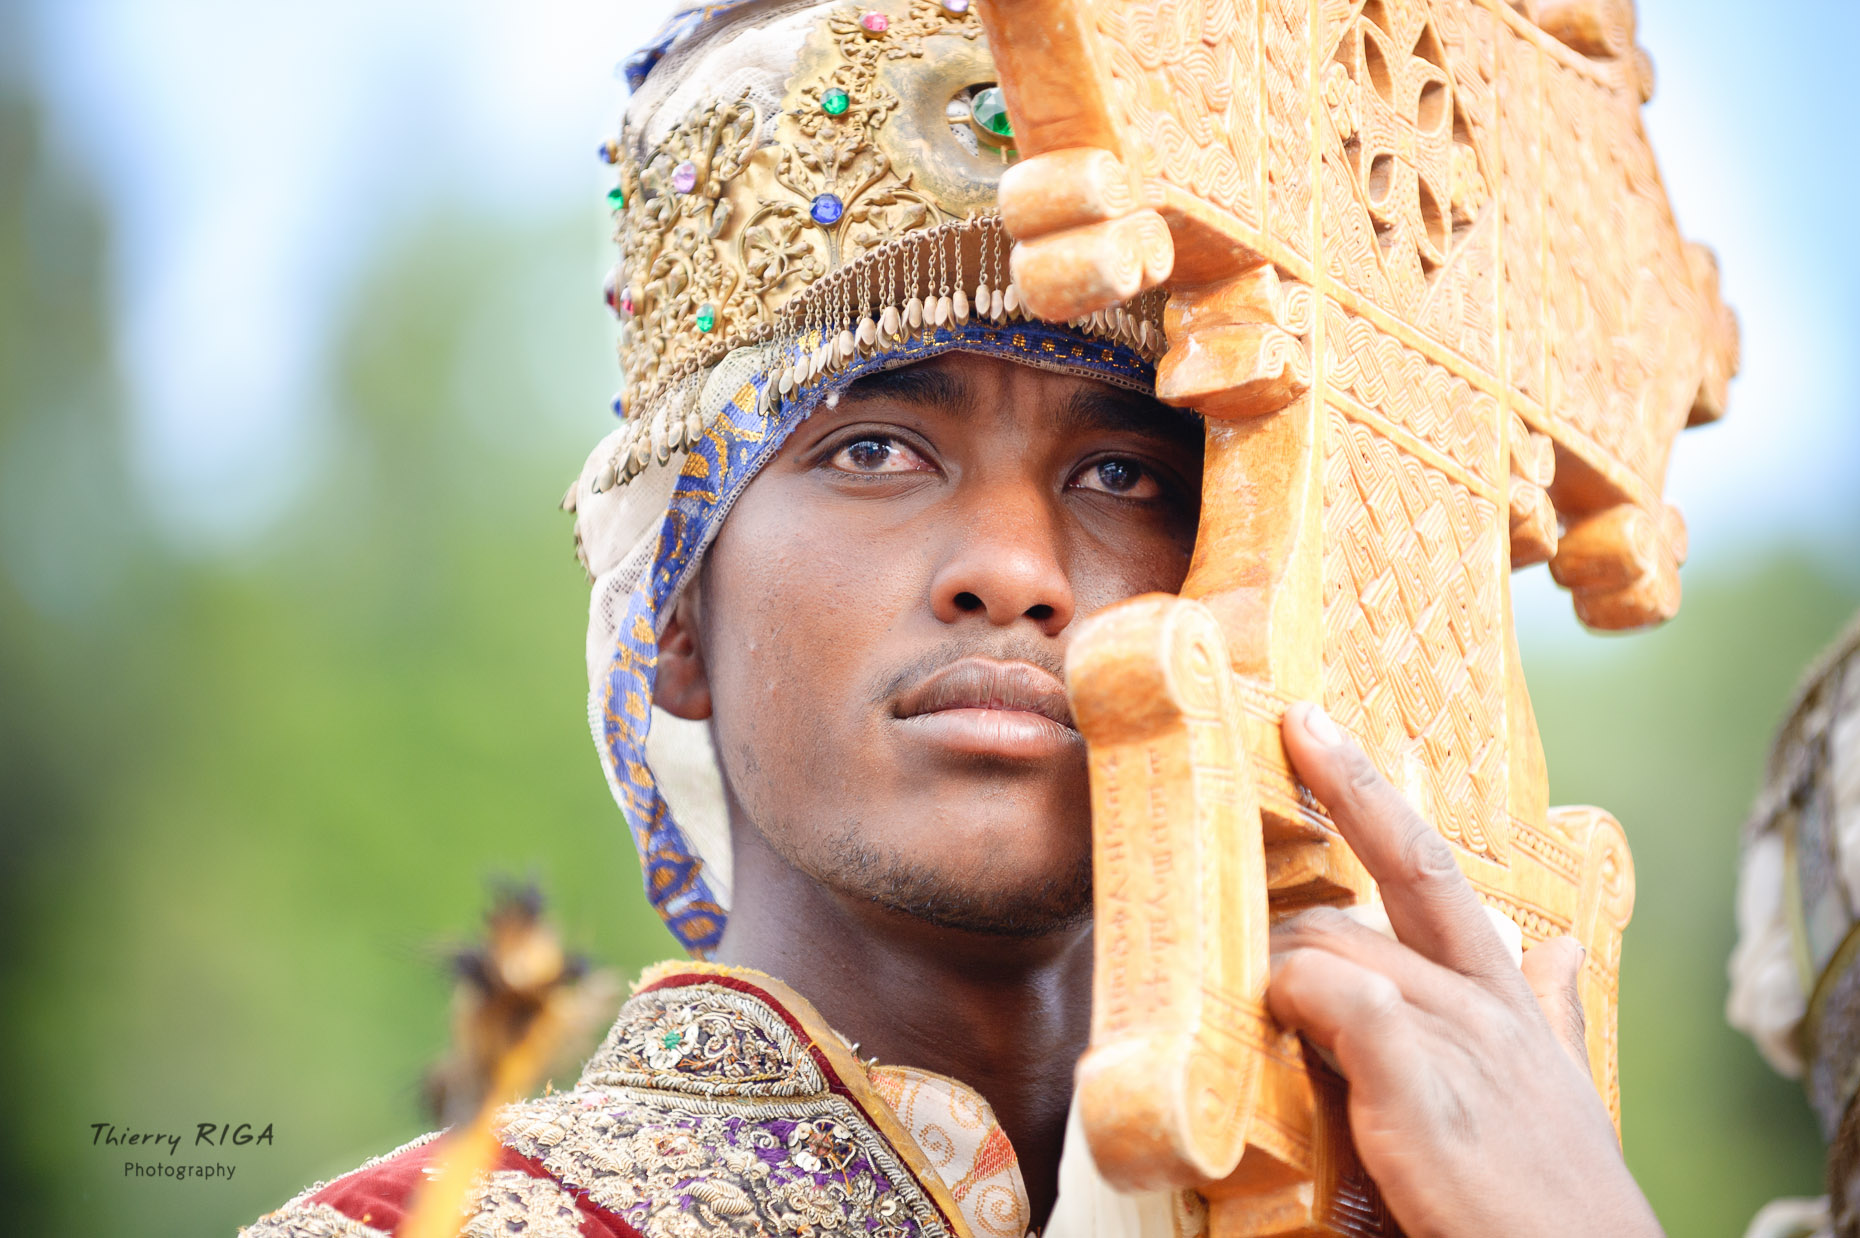 Priest with golden crown and wooden cross during Meskel celebrations in Lalibela, Ethiopia, Thierry Riga